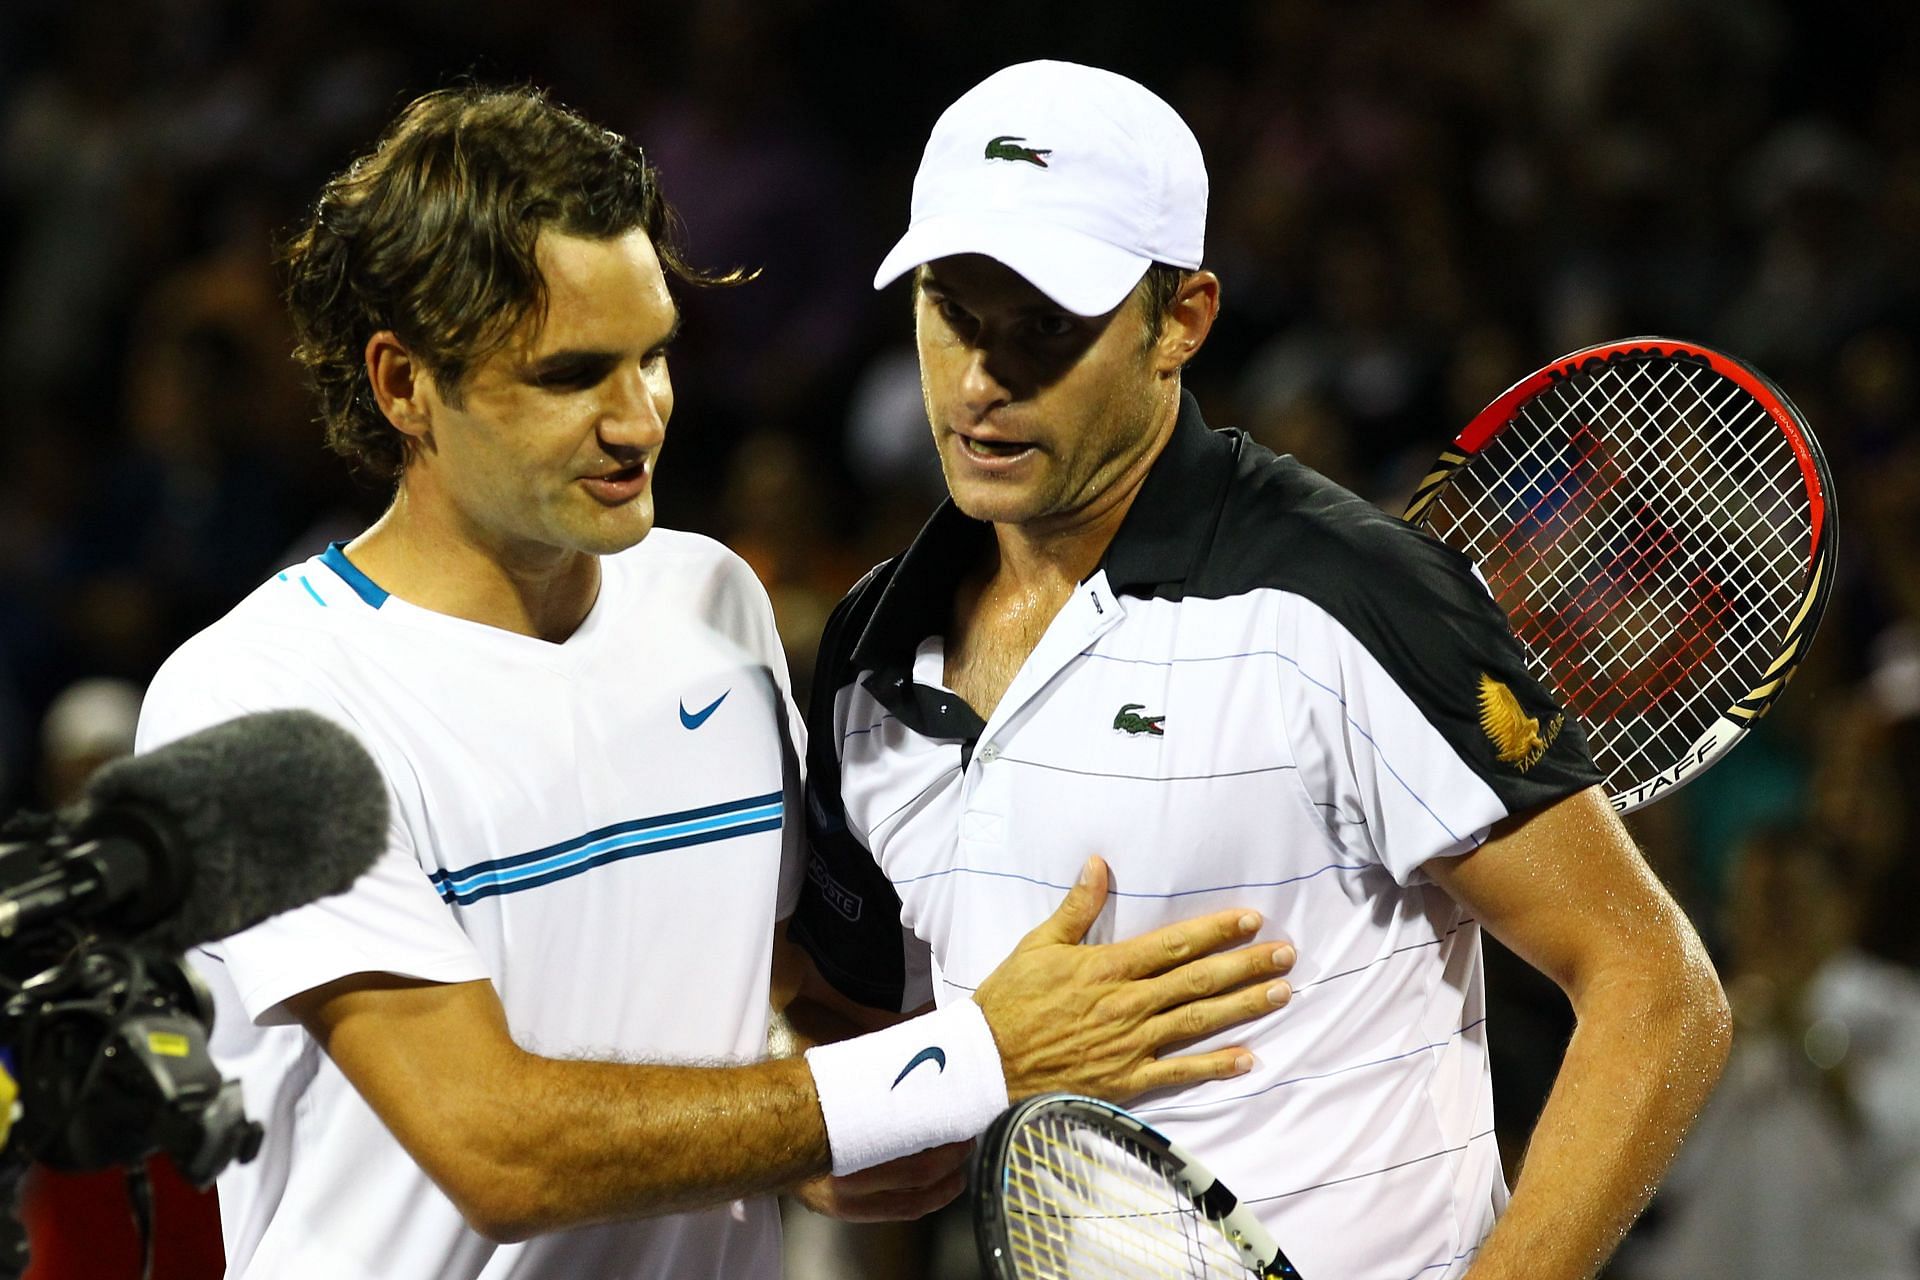 Roger Federer and Andy Roddick greet each other.